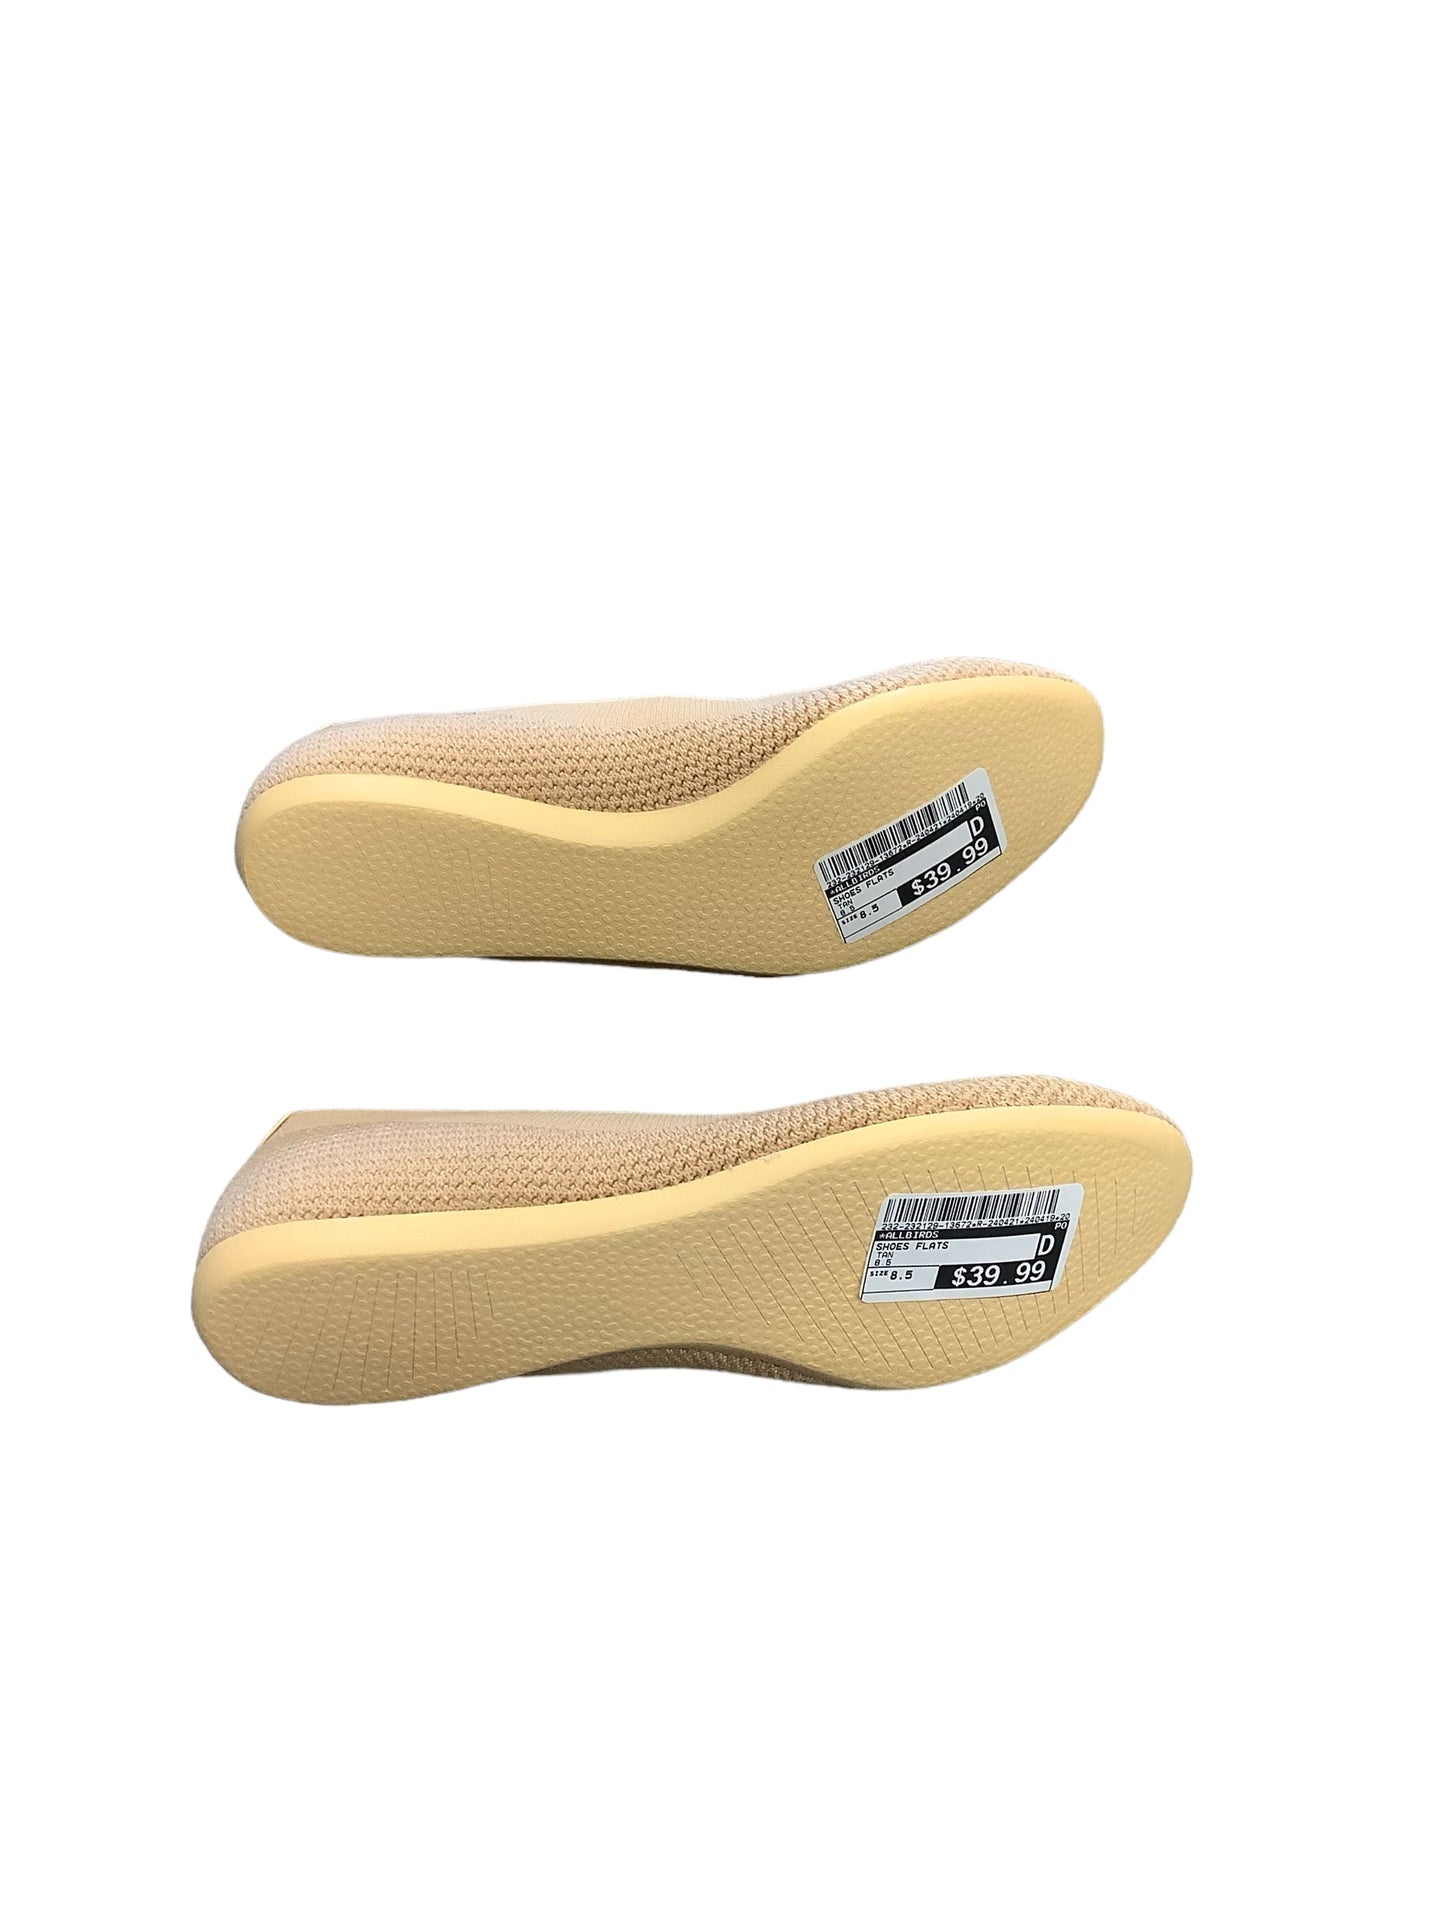 Shoes Flats By Allbirds  Size: 8.5